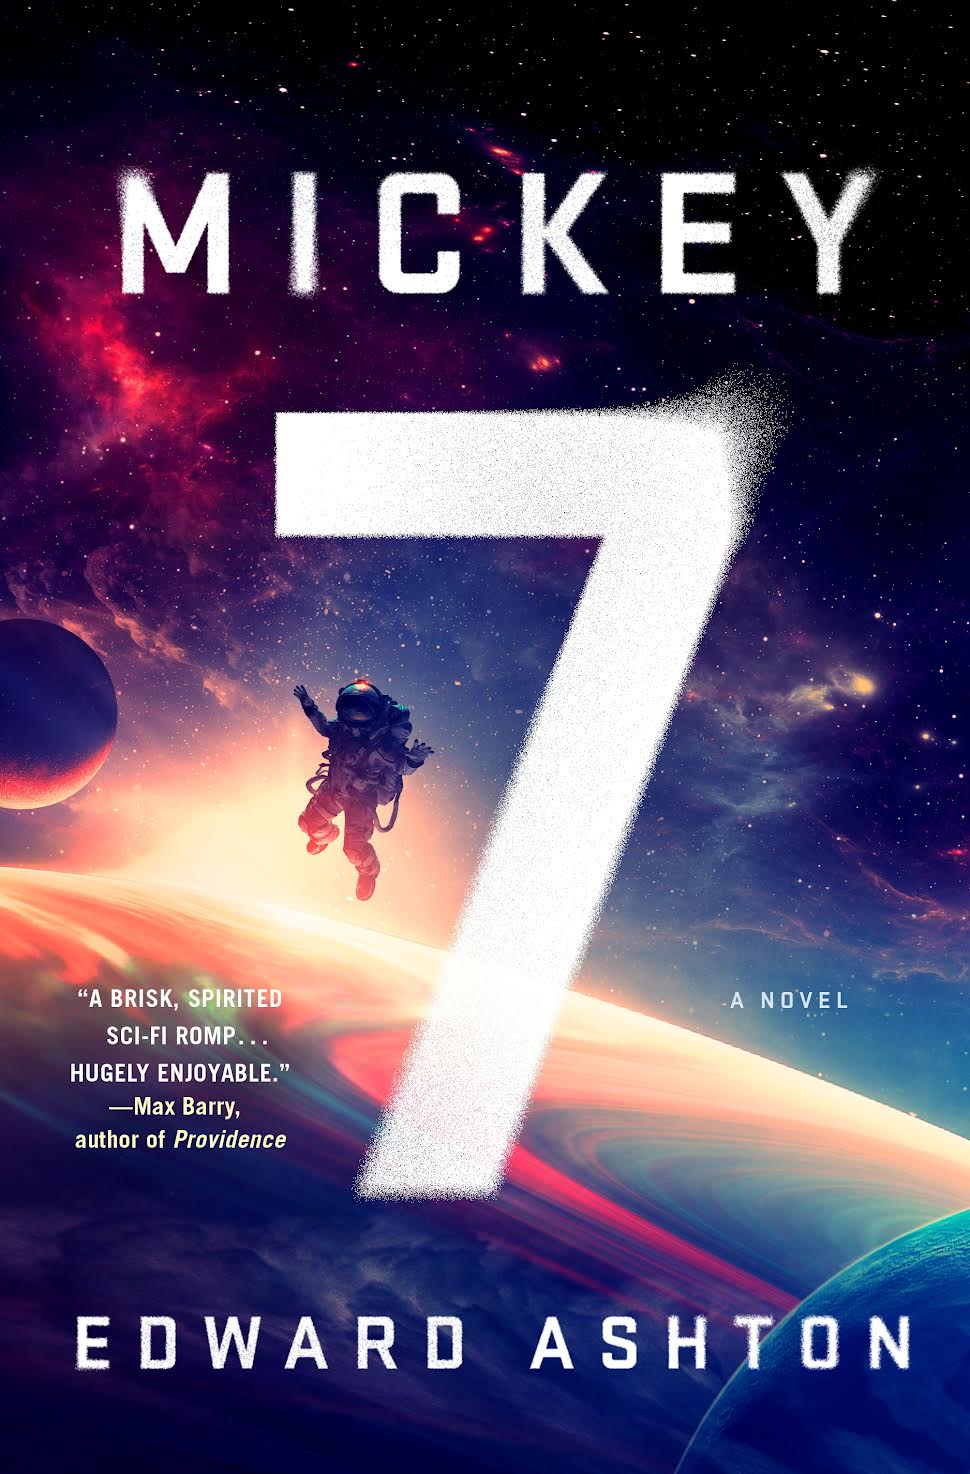 Edward Ashton's new novel "Mickey7" is headed for Hollywood, with Bong Joon Ho signed on to direct.